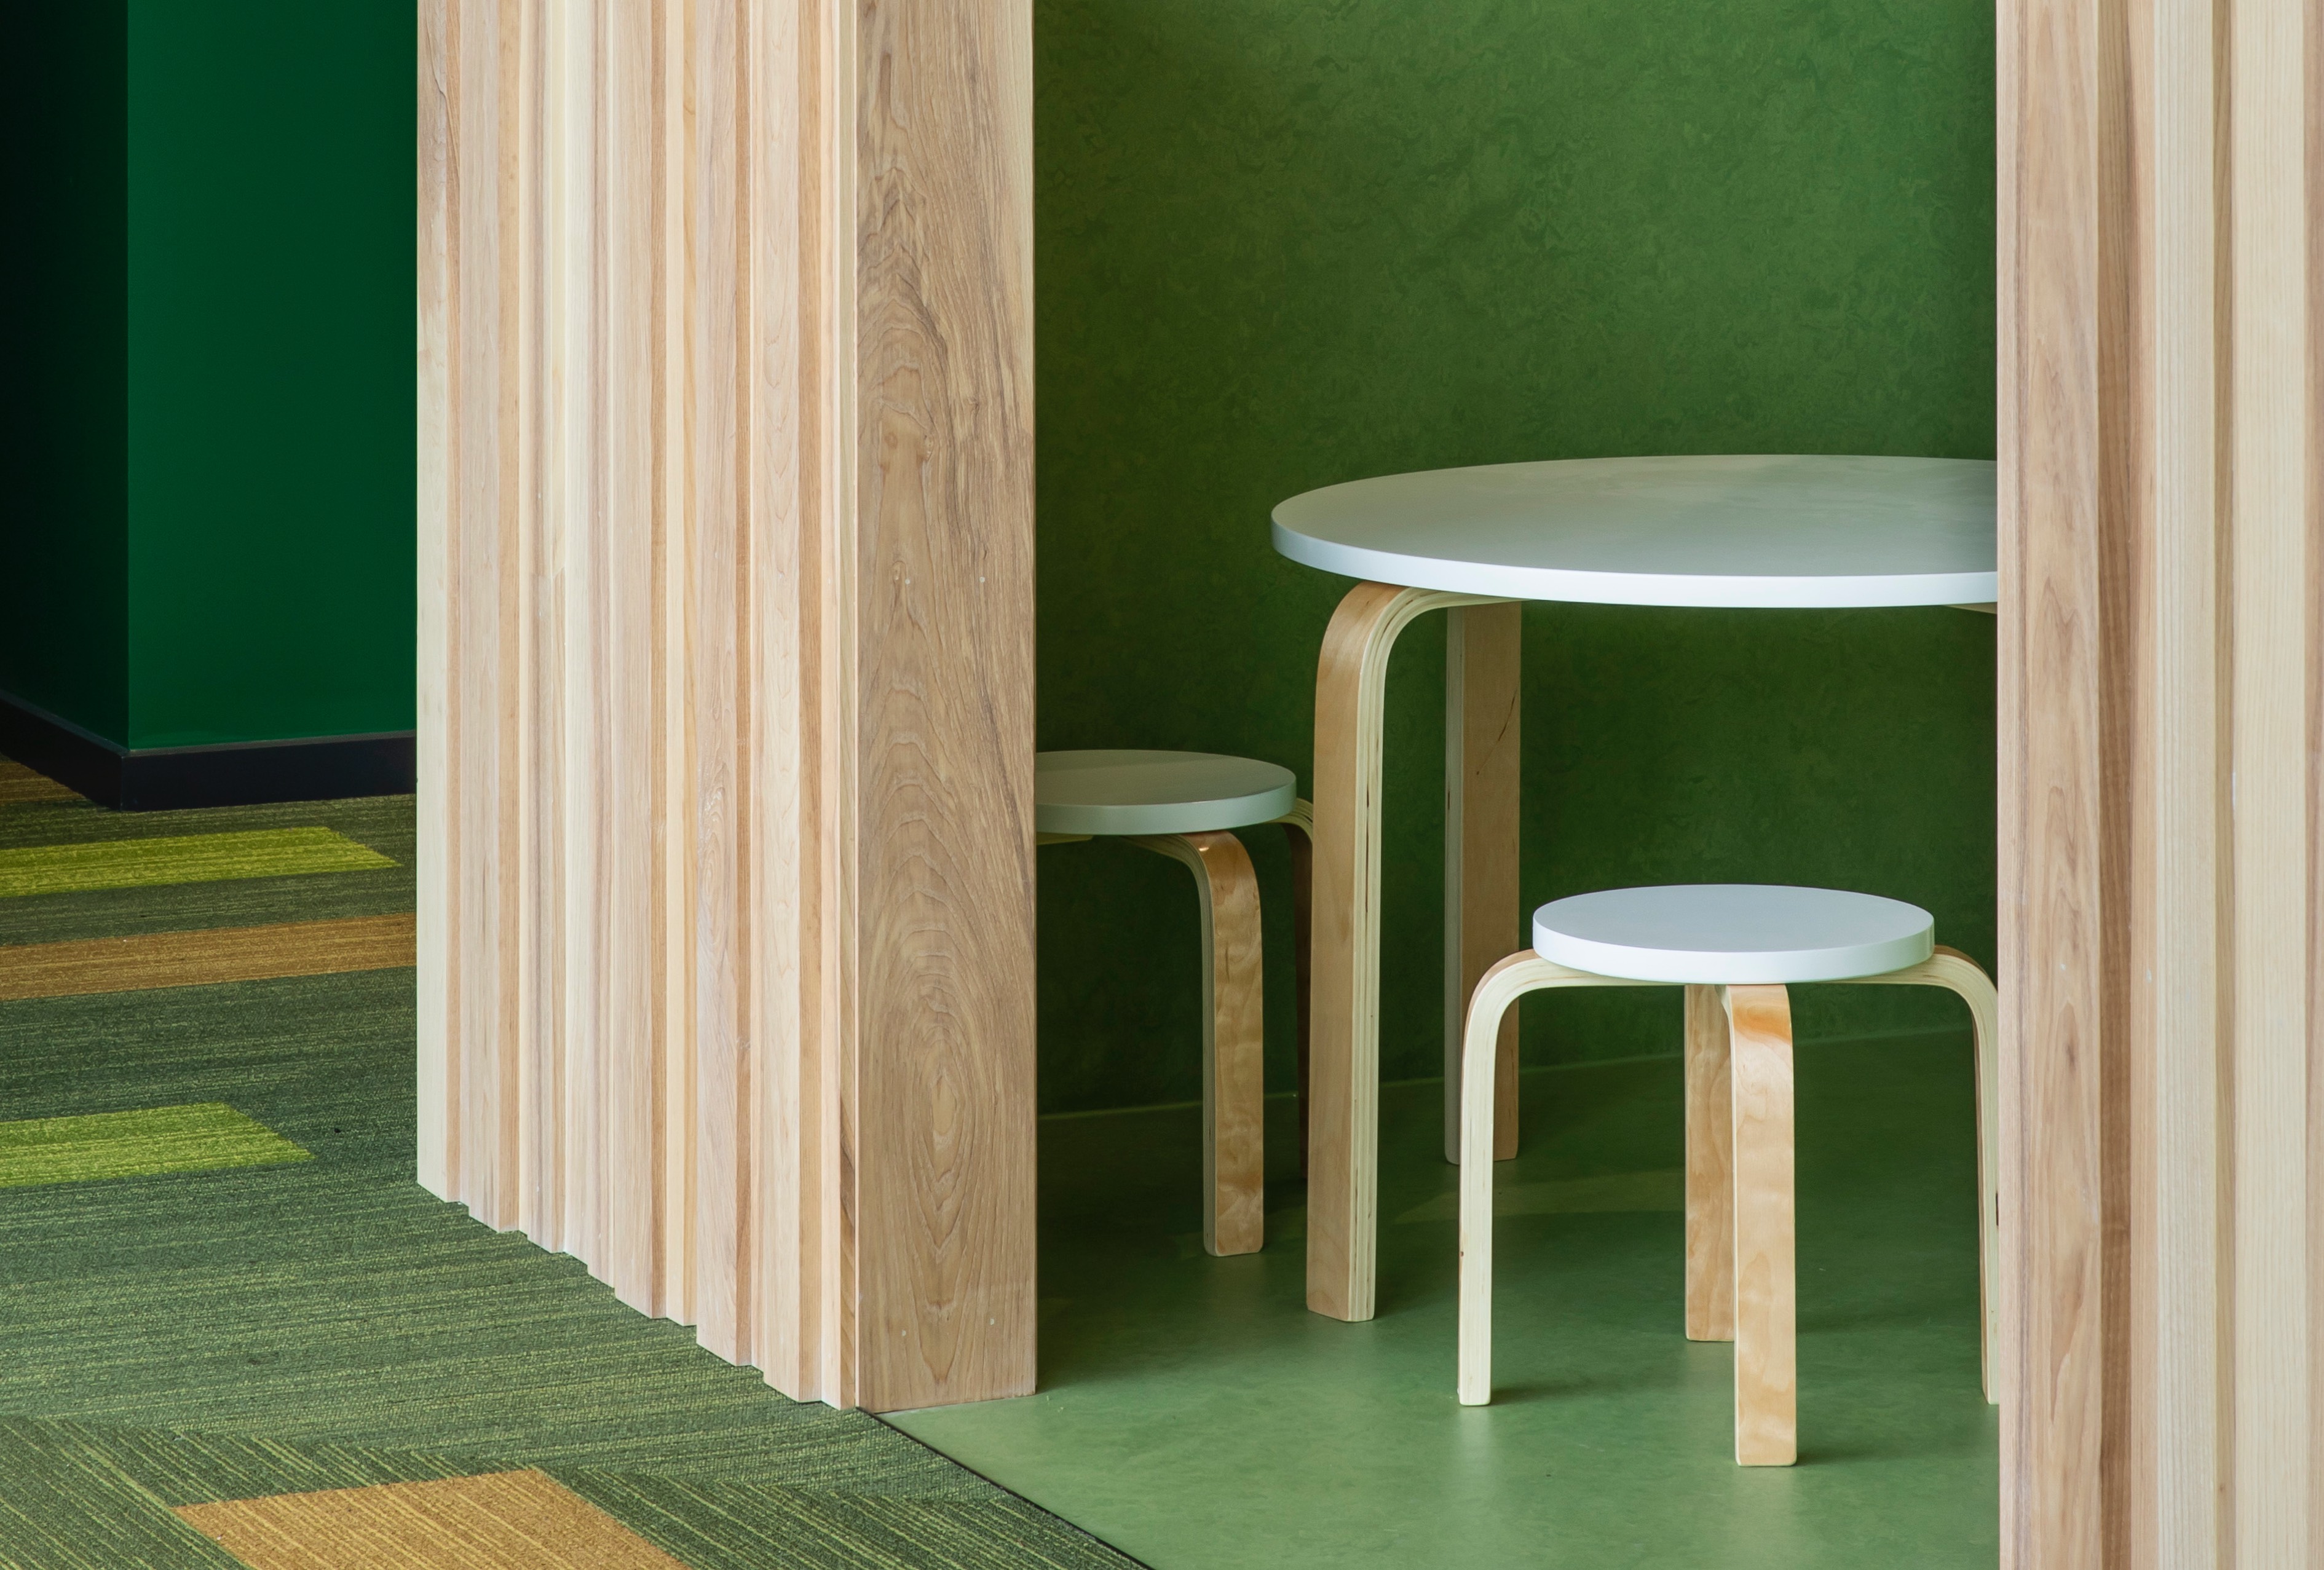 Detail of childnres seating area depicting mid-century circular table and chairs with green palatte